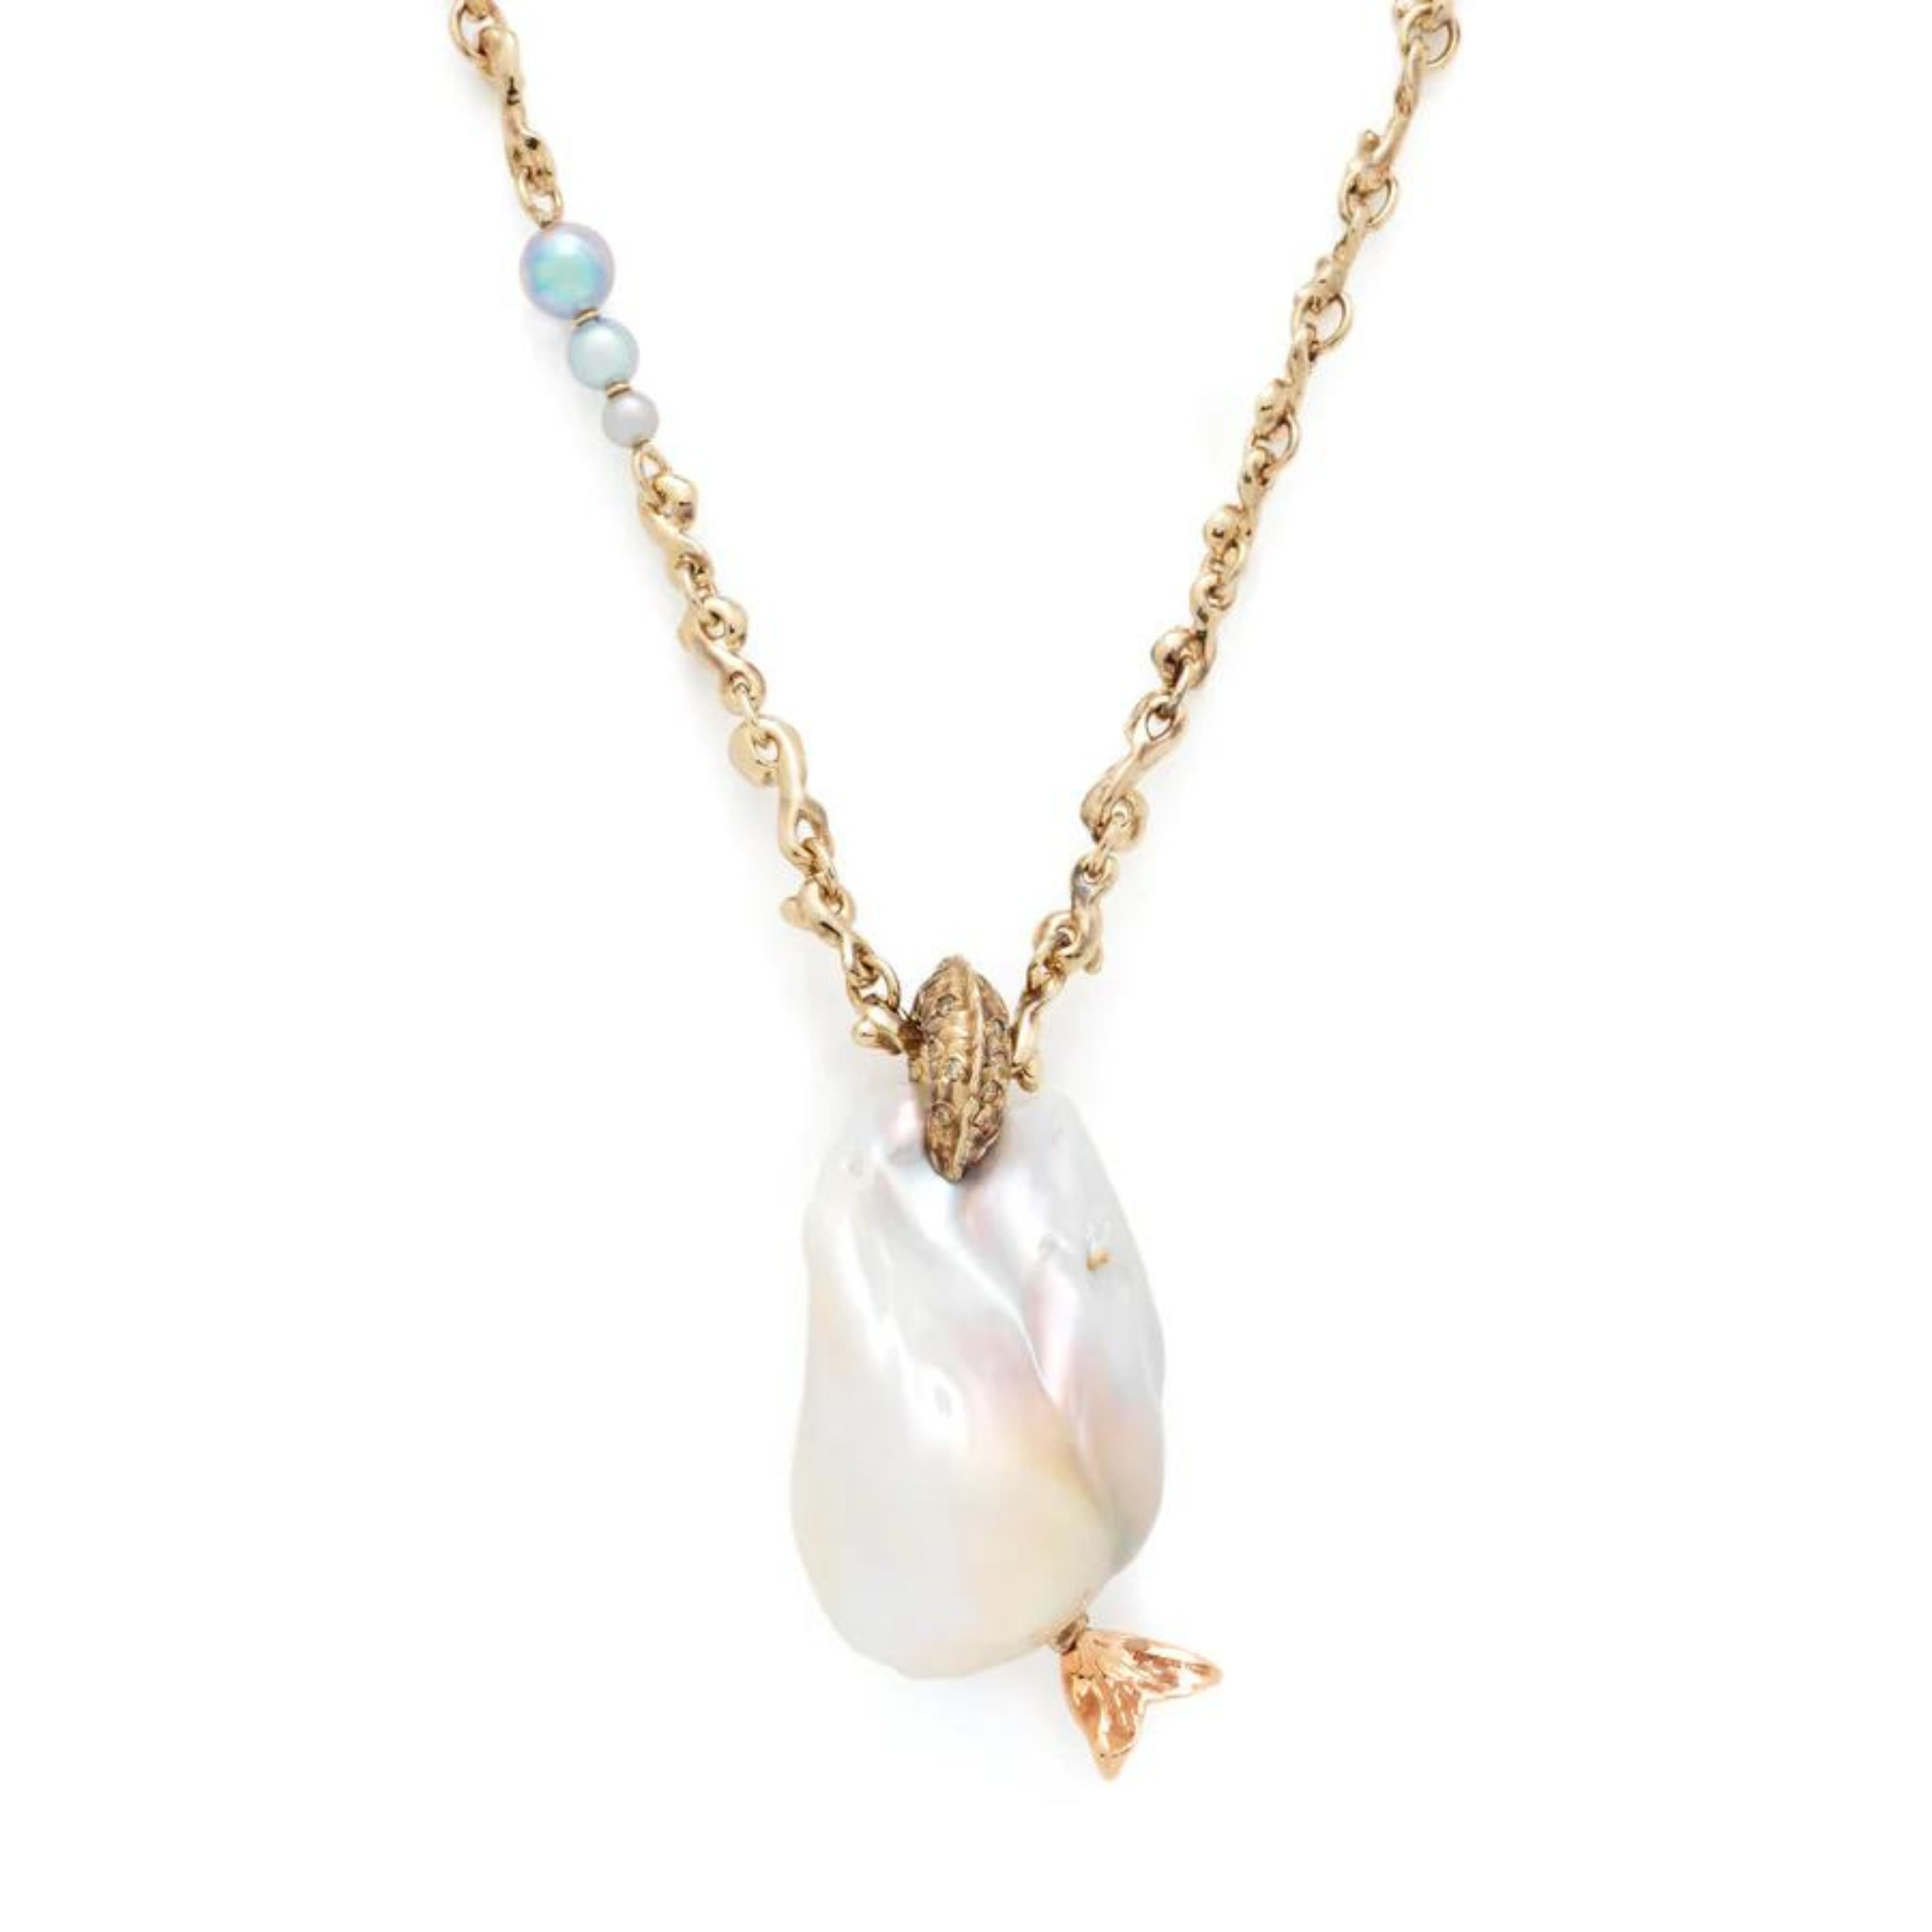 Bibi van der Velden Mermaid Pearl Pendant on Waves Chain. A South Sea baroque pearl has a mermaid&#39;s tail crafted from 18k white and rose gold woven into it. Brown diamonds embellish it&#39;s tail and the pearl is set on an 18k white gold chain with round grey pearls of varying sizes.